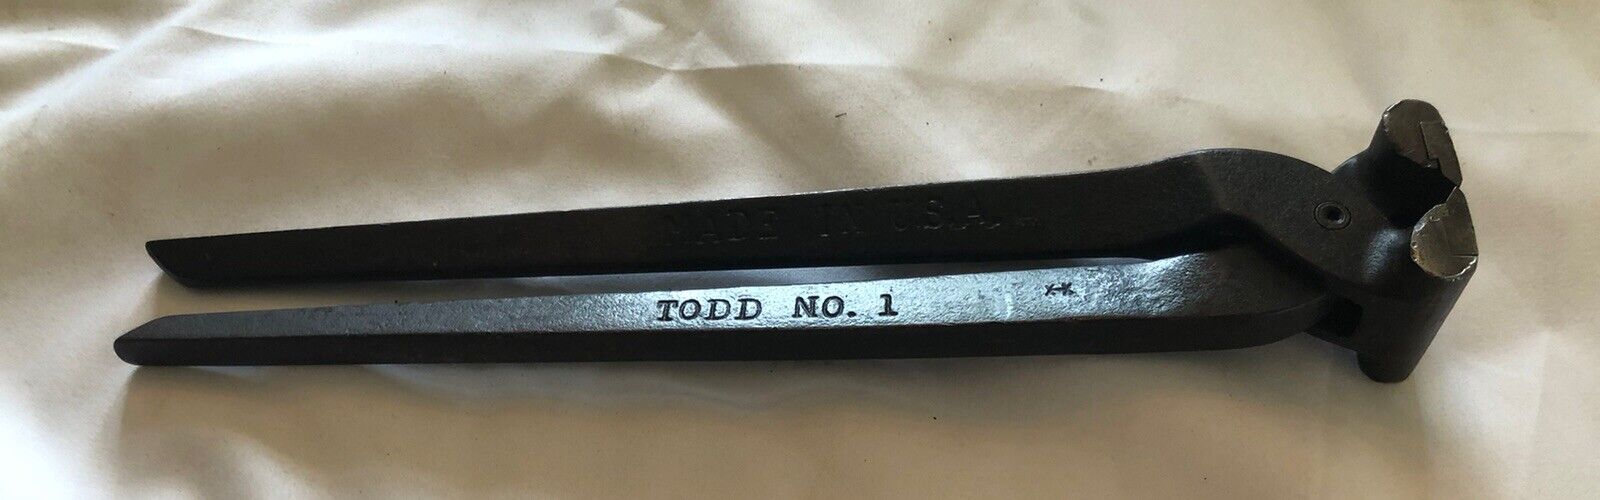 VINTAGE TODD'S NO. 1 END NIPPERS CUTTING PLIERS